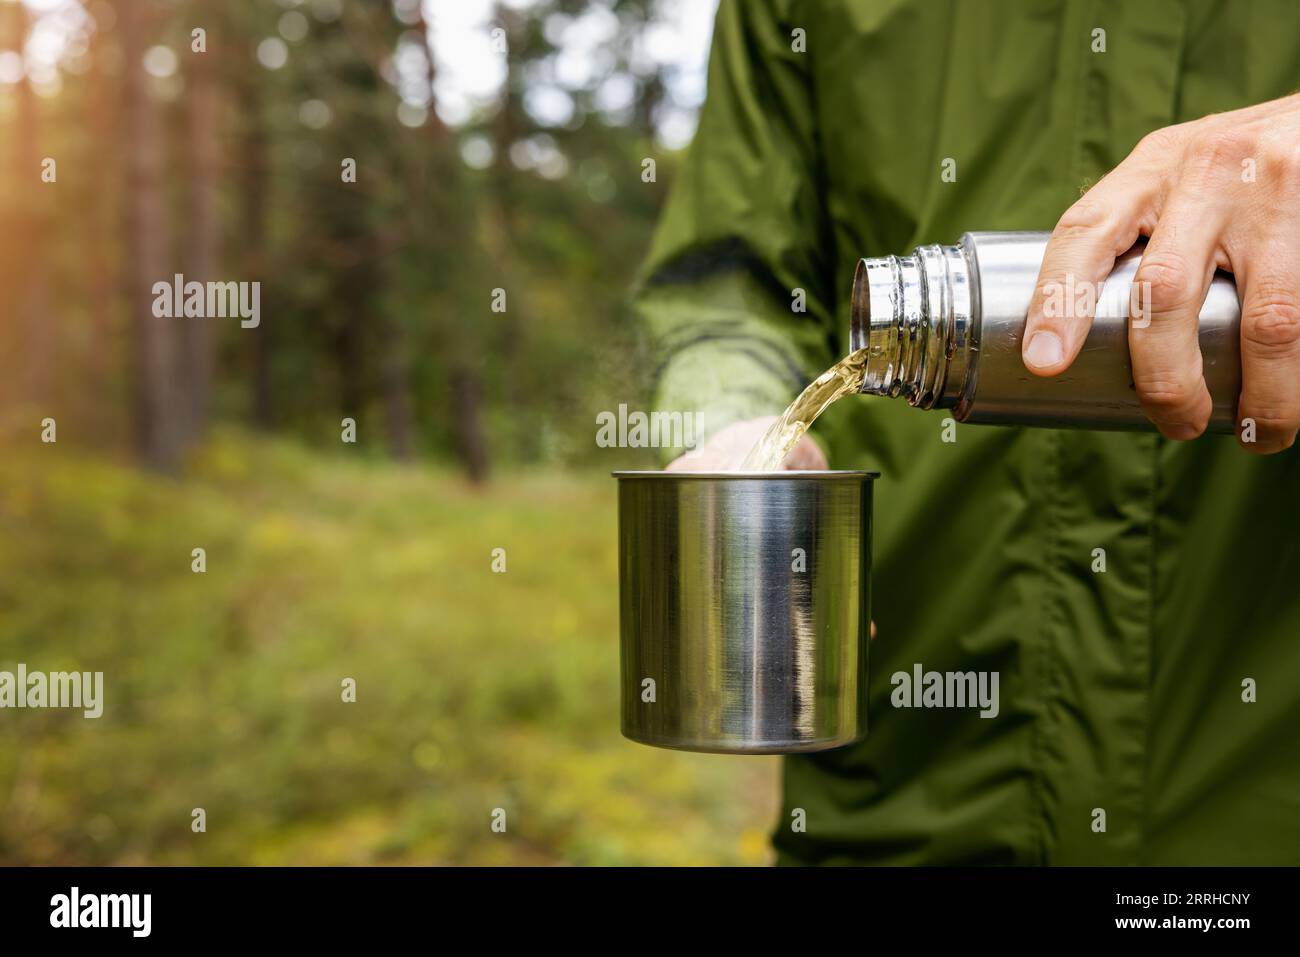 man pours hot drink from thermos flask into a metal cup in forest. nature tourism and camping gear concept. copy space Stock Photo